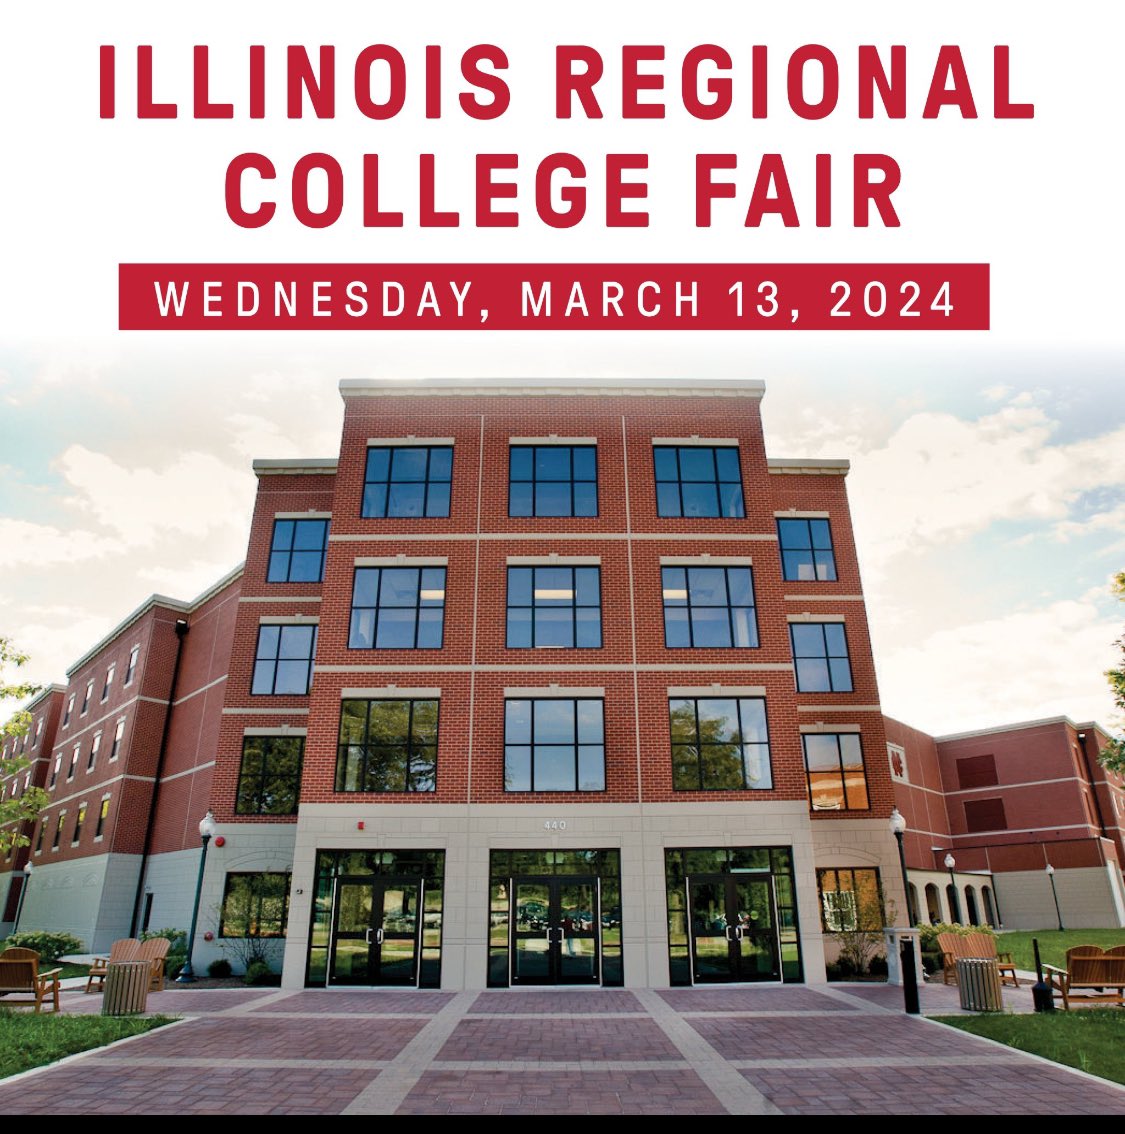 This Wed. (3/13/24) from 6-8p is the Illinois Regional College Fair at @northcentralcol. Over 200 colleges and universities will be there. A great opportunity to connect with schools & learn more!! For details, visit bit.ly/48z104j @NNHSposey @Naperville203 #Empower203